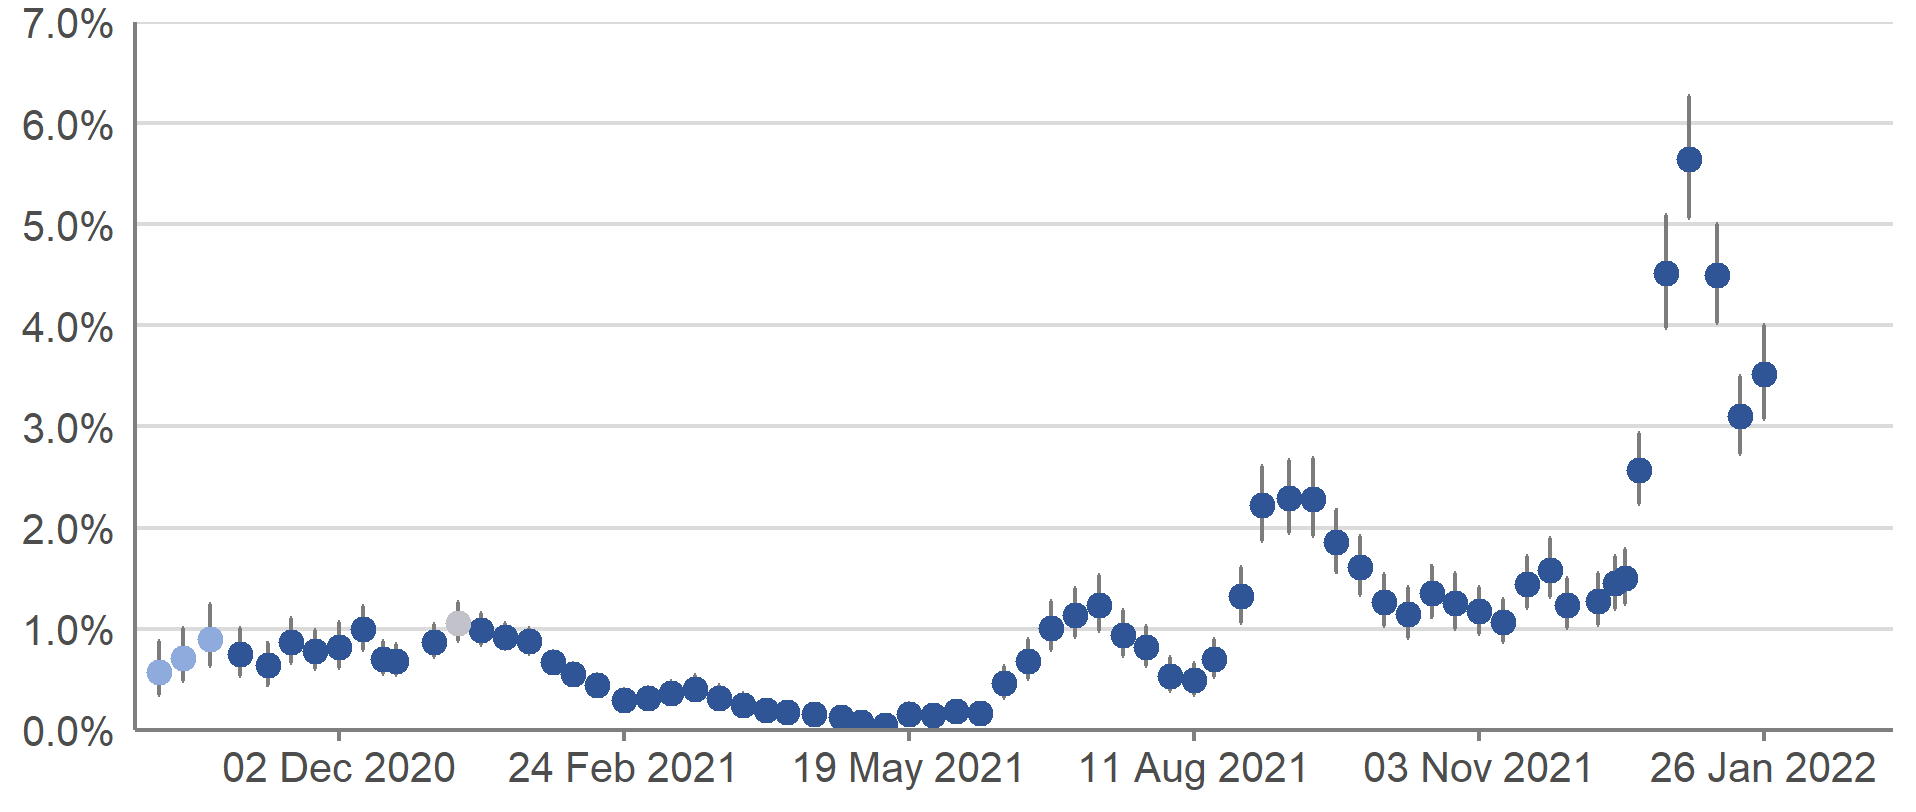 Estimates for the percentage of people testing positive for COVID-19 in Scotland increased between early-December 2021 and early-January 2022, and reached their highest peak since the start of the pandemic in the week 1 to 7 January 2022.  Estimates then decreased for two weeks but in the most recent week, the trend is uncertain.